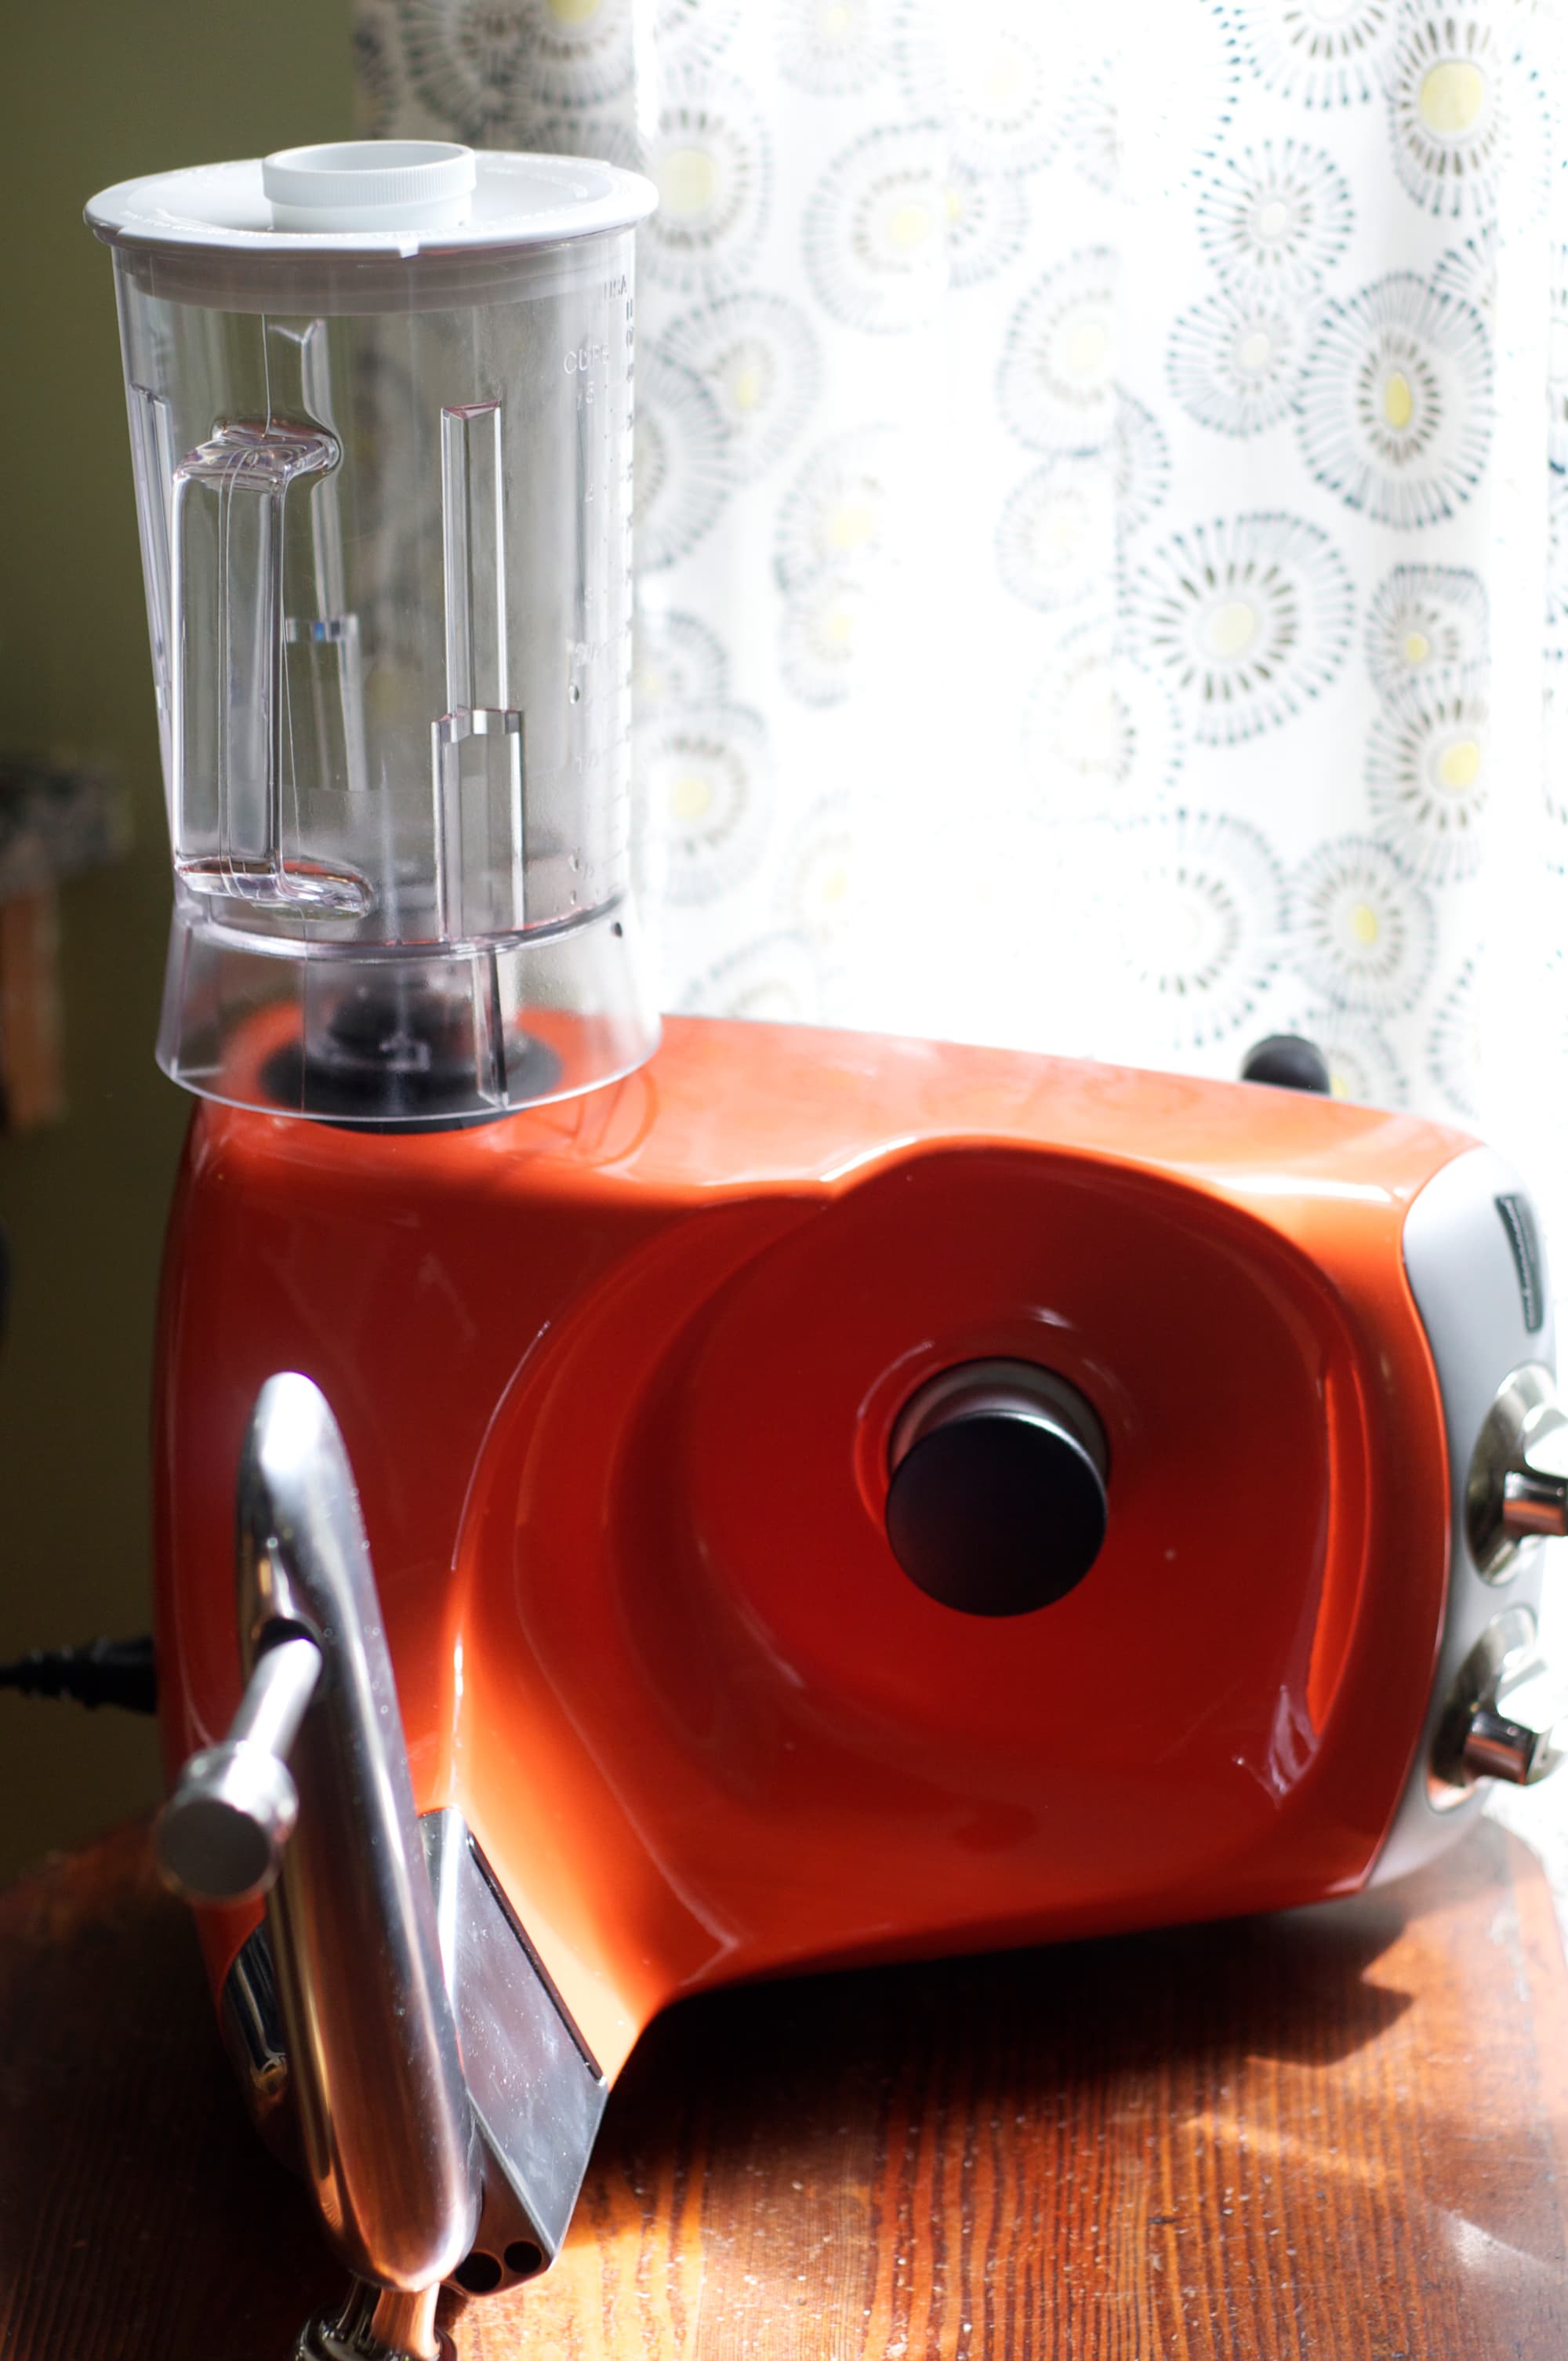 Ankarsrum Mixer Review: This Splurge-Worthy Mixer Is a Baker's Dream